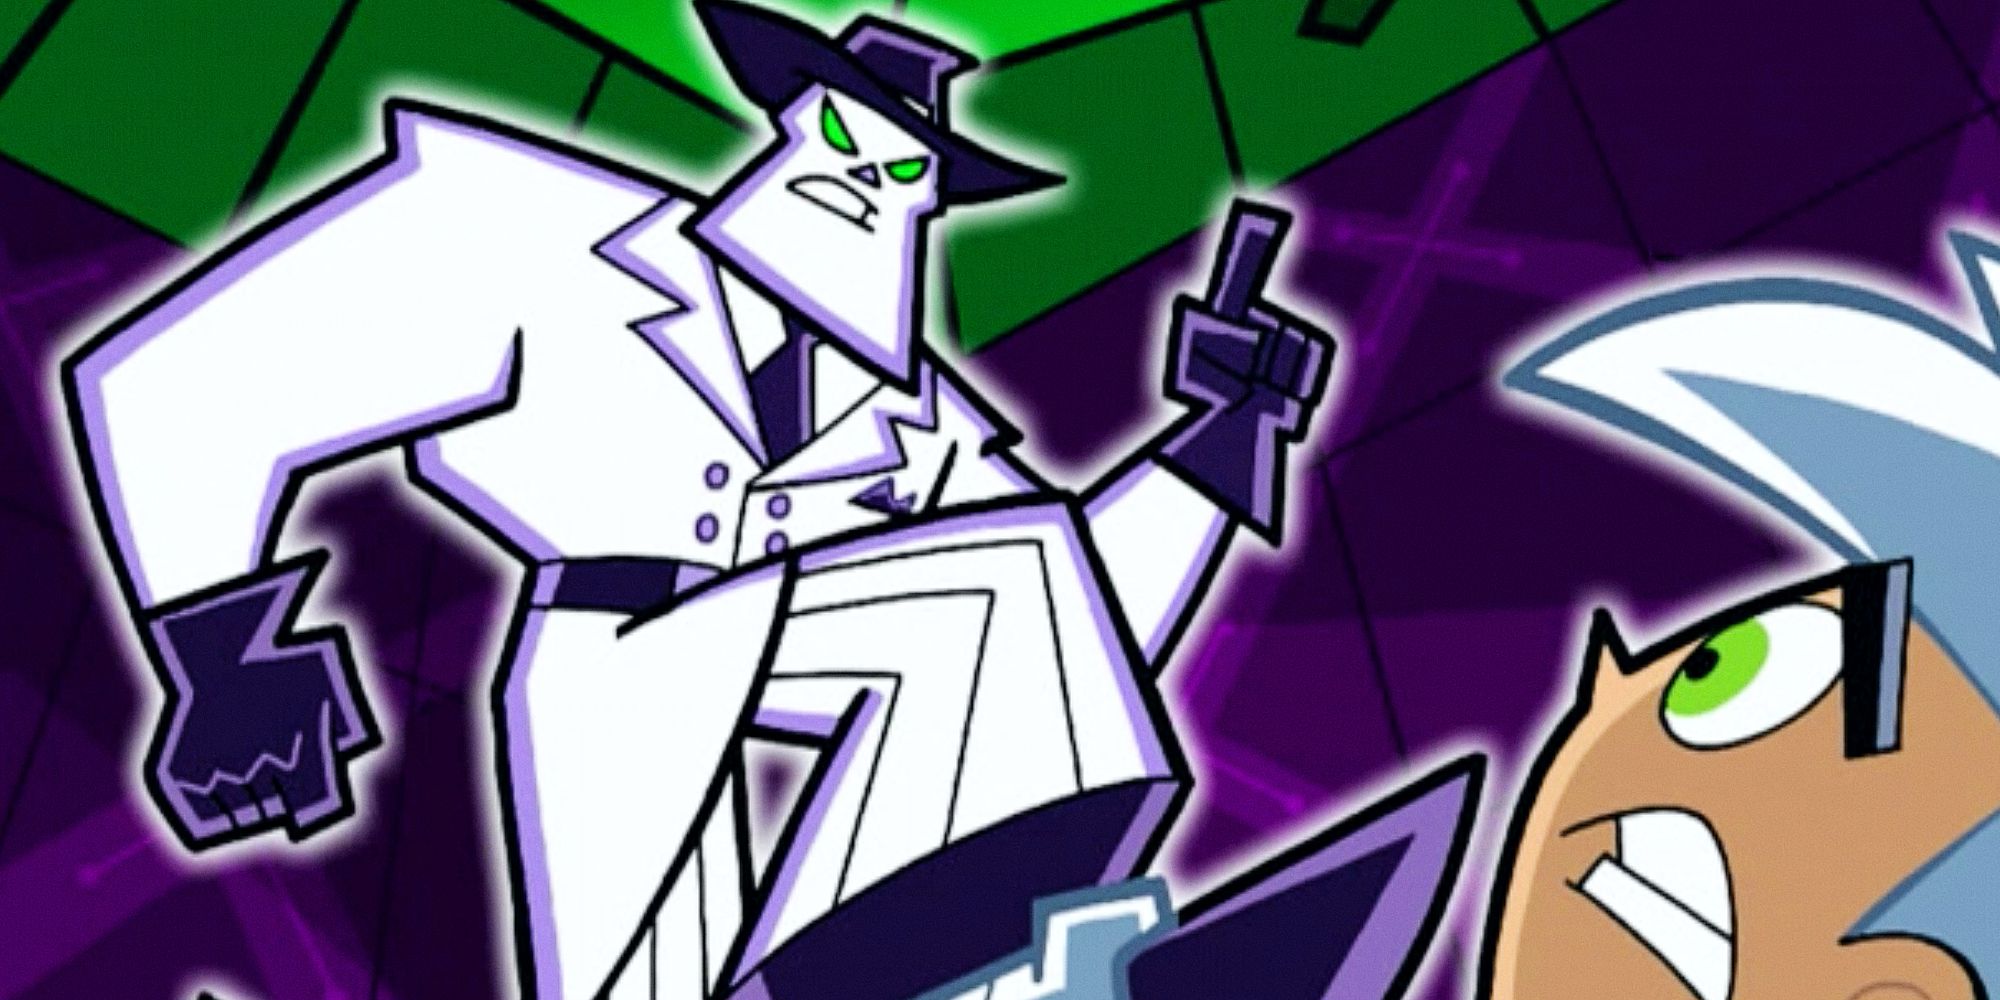 Danny Phantom Petition To Bring Back Nickelodeon Show Gets Over 17,000 Signatures